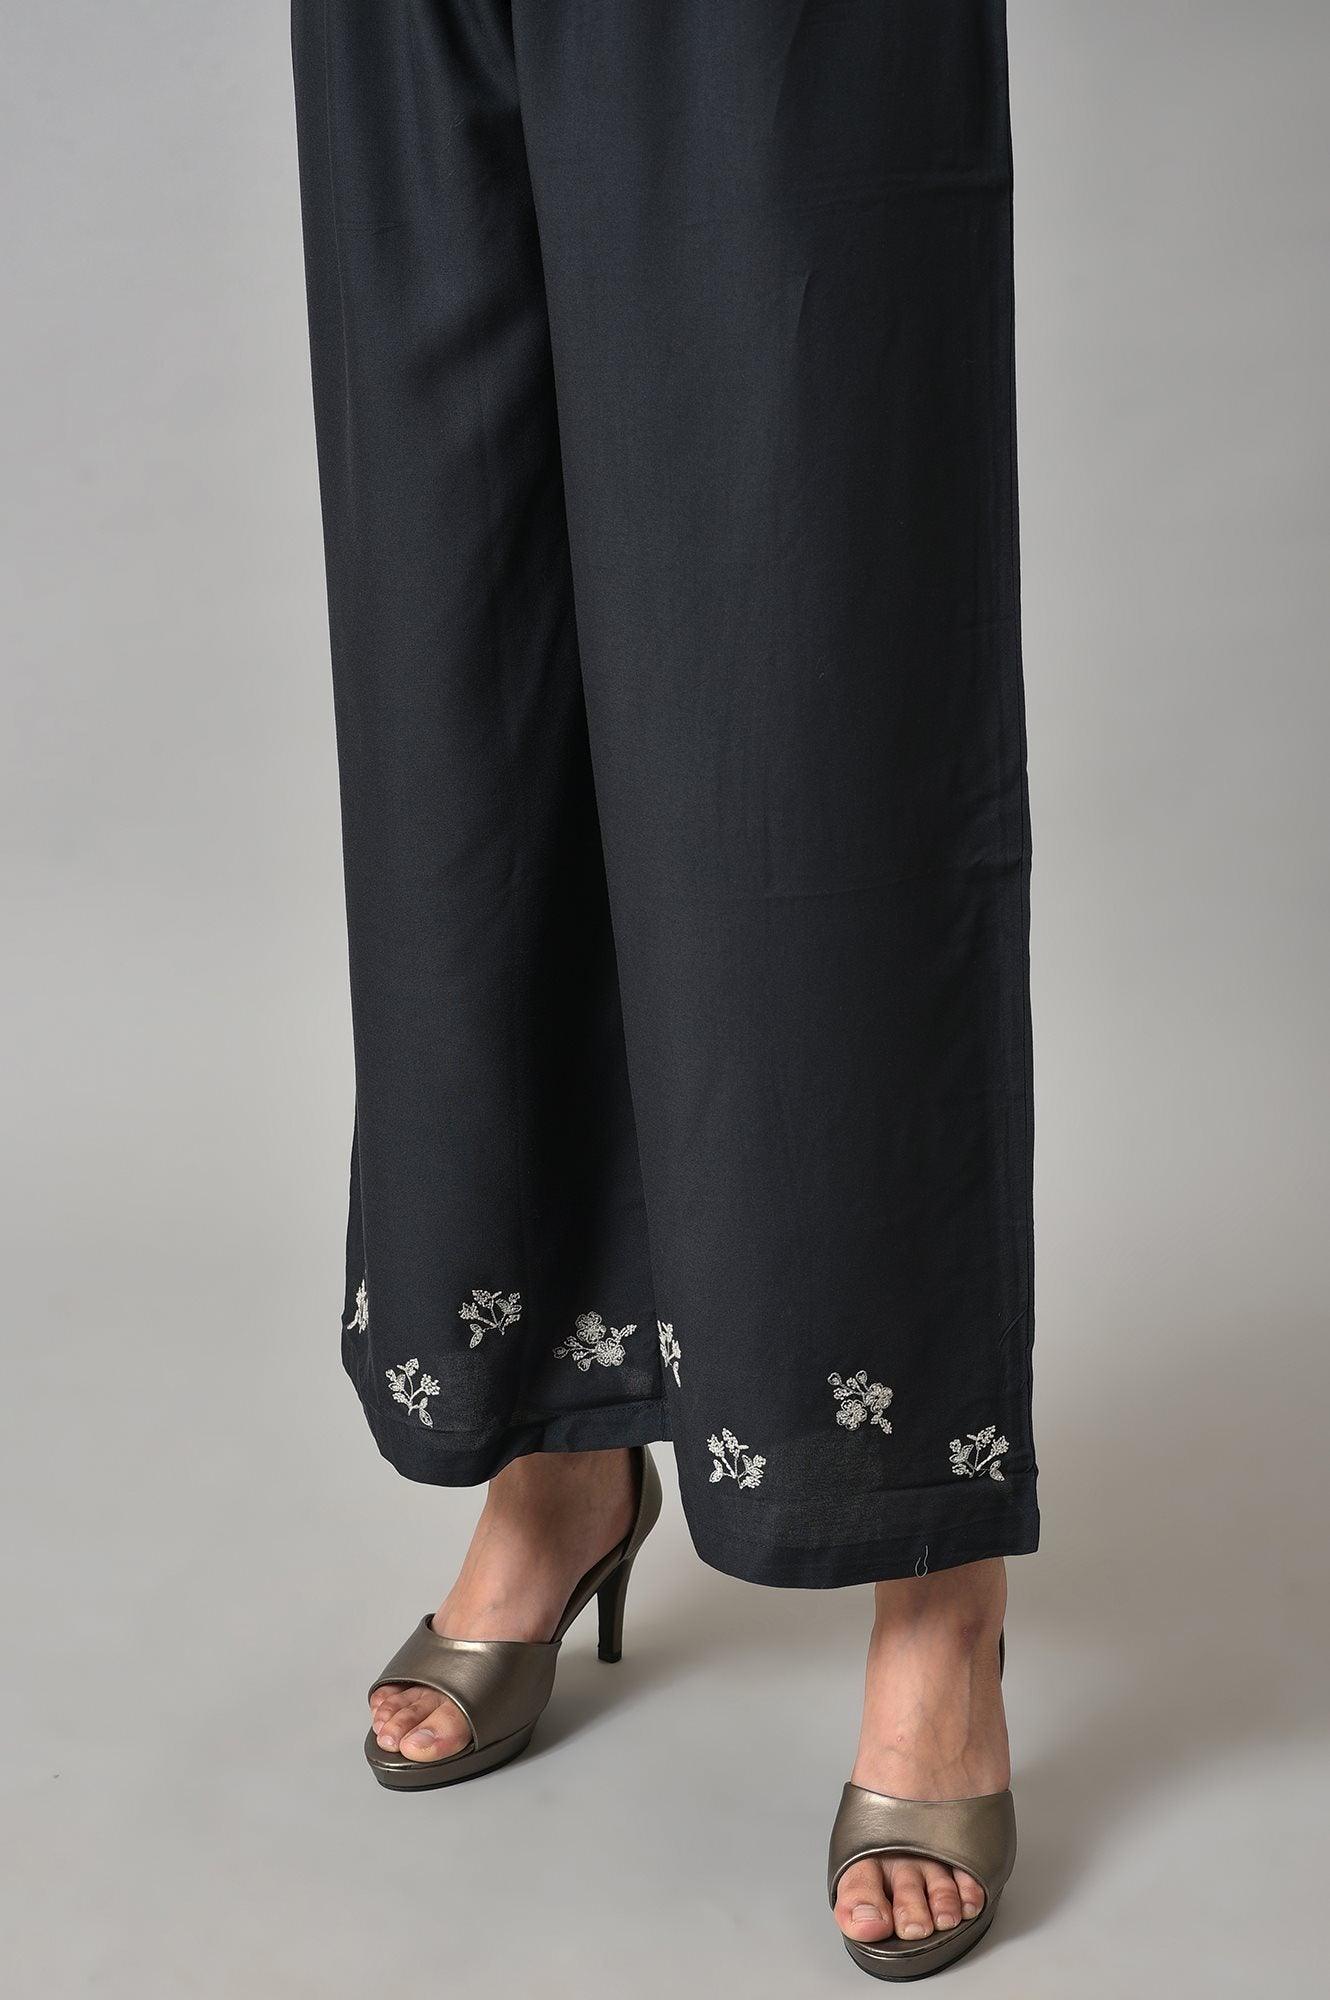 White And Deep Blue Ombre kurta With Printed Gillet And Parallel Pants - wforwoman